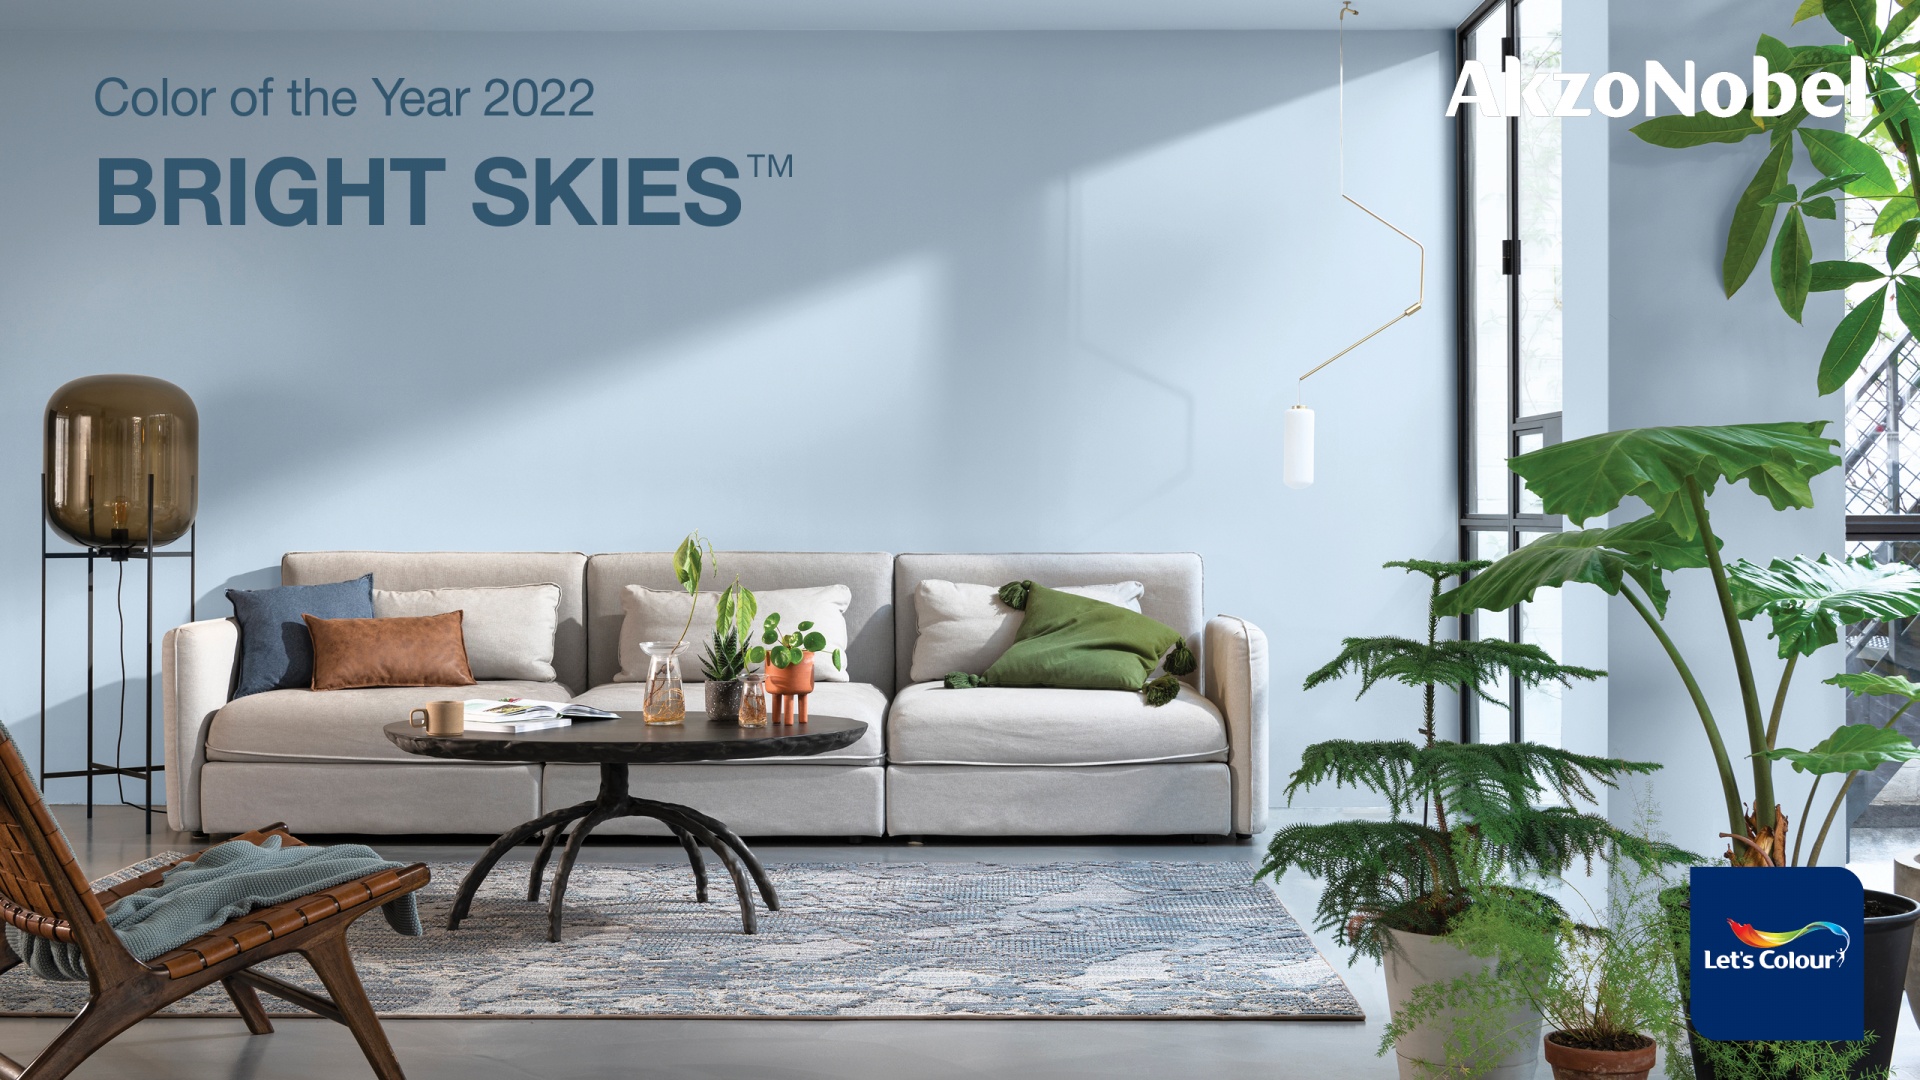 AkzoNobel brings a breath of fresh air to homes with Colour of the Year 2022